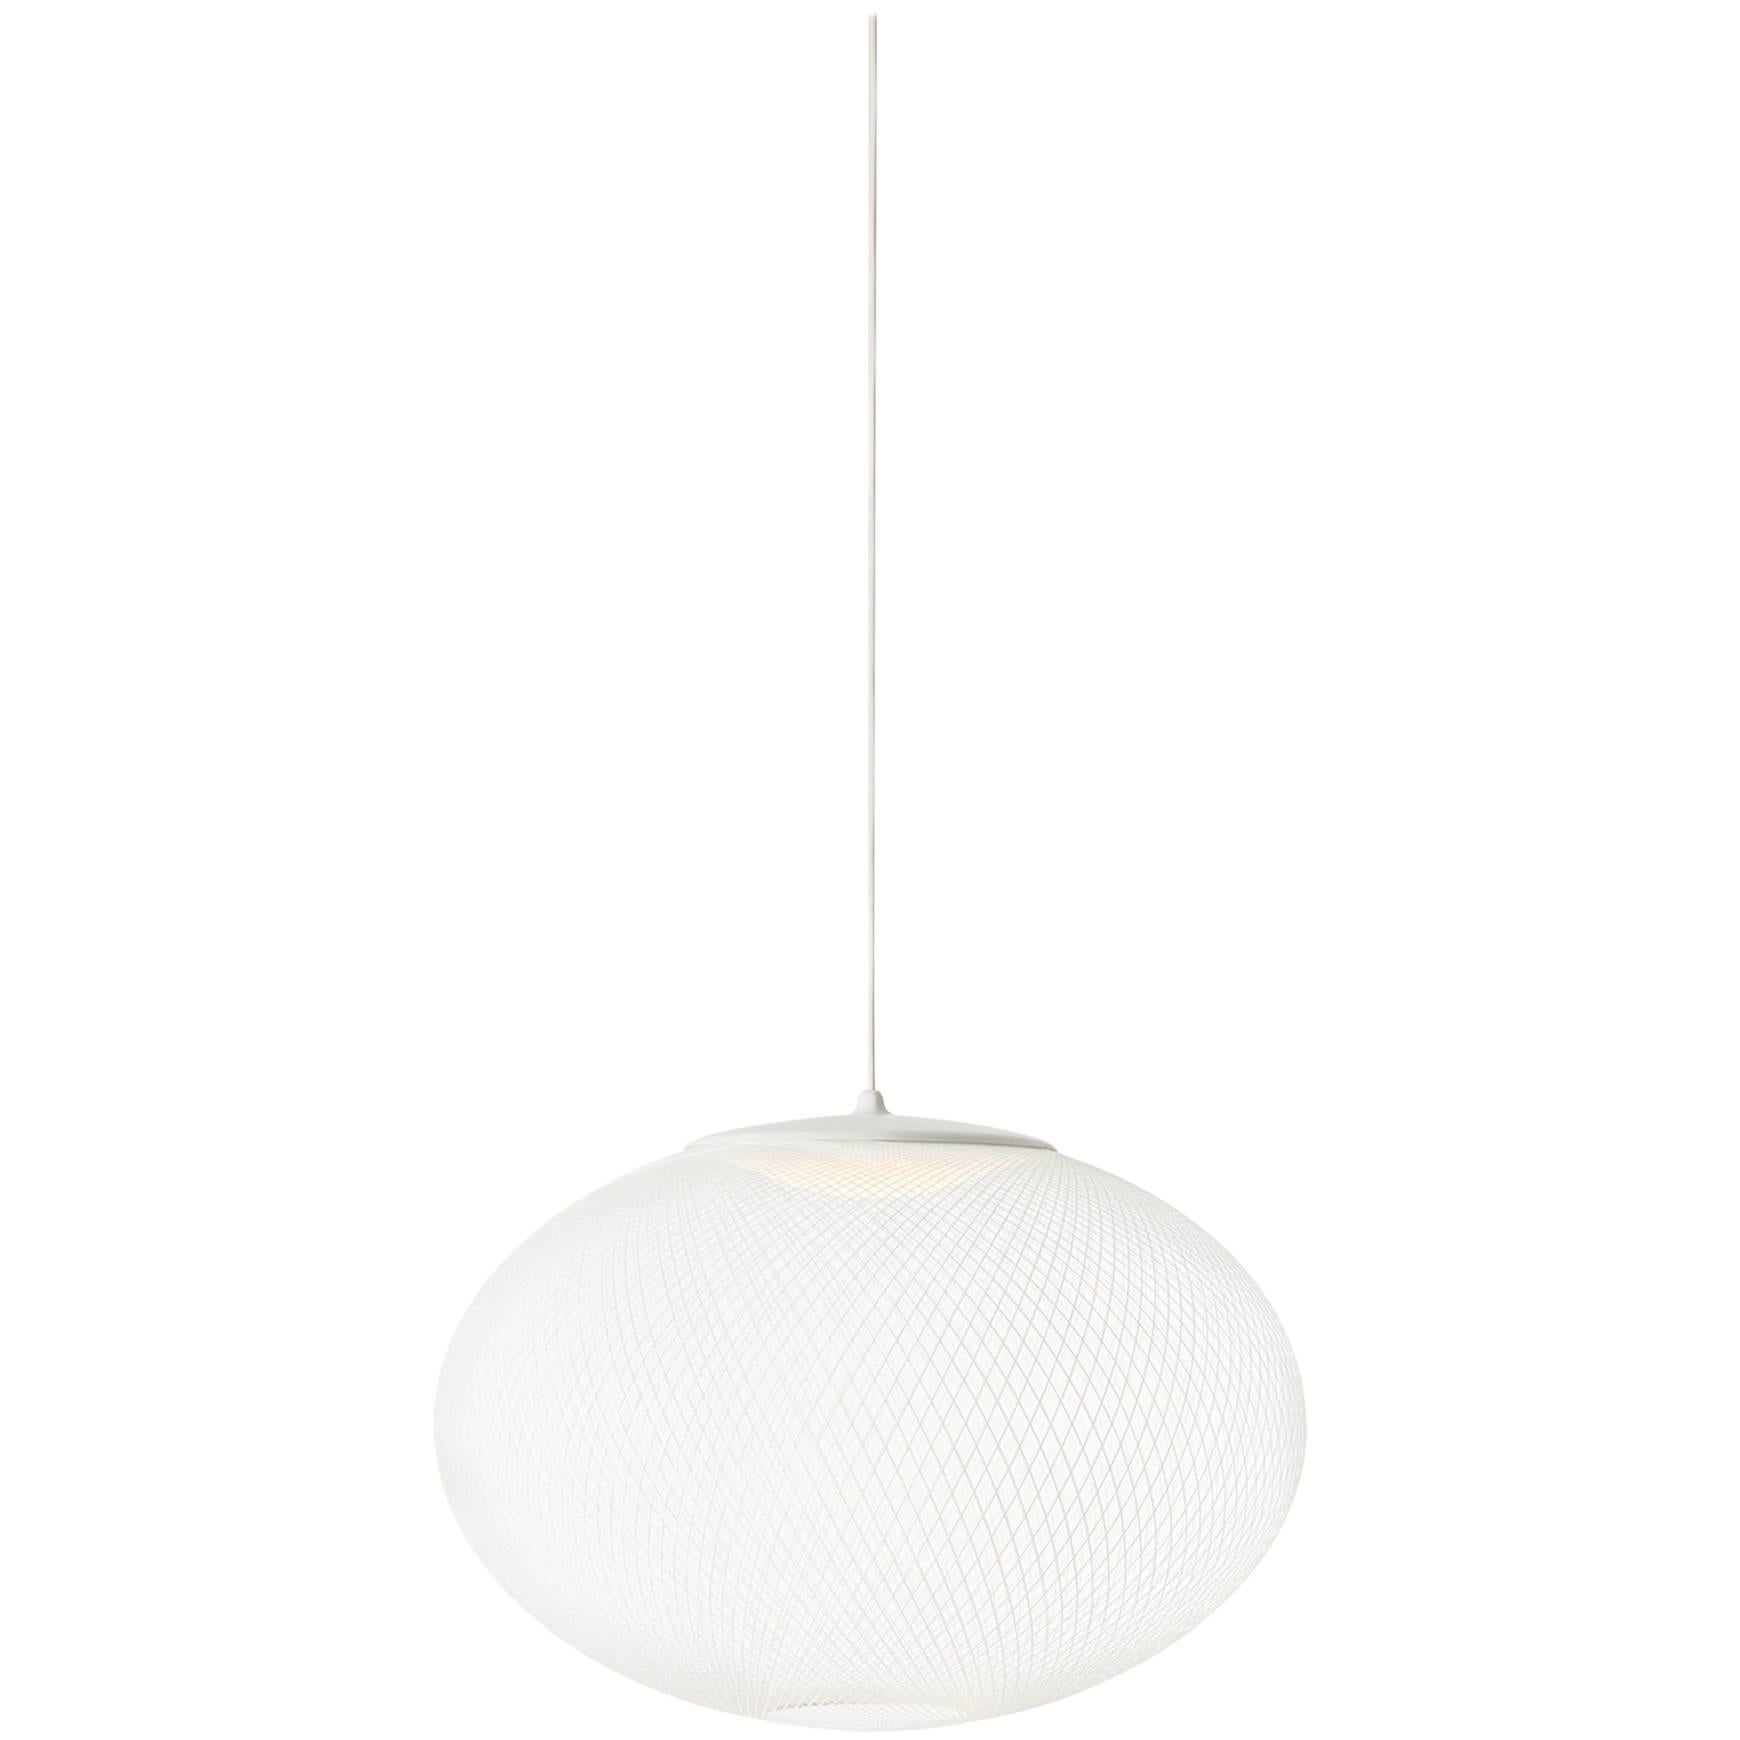 NR2 Medium White Suspension Lamp with Integrated LED by Bertjan Pot for Moooi For Sale